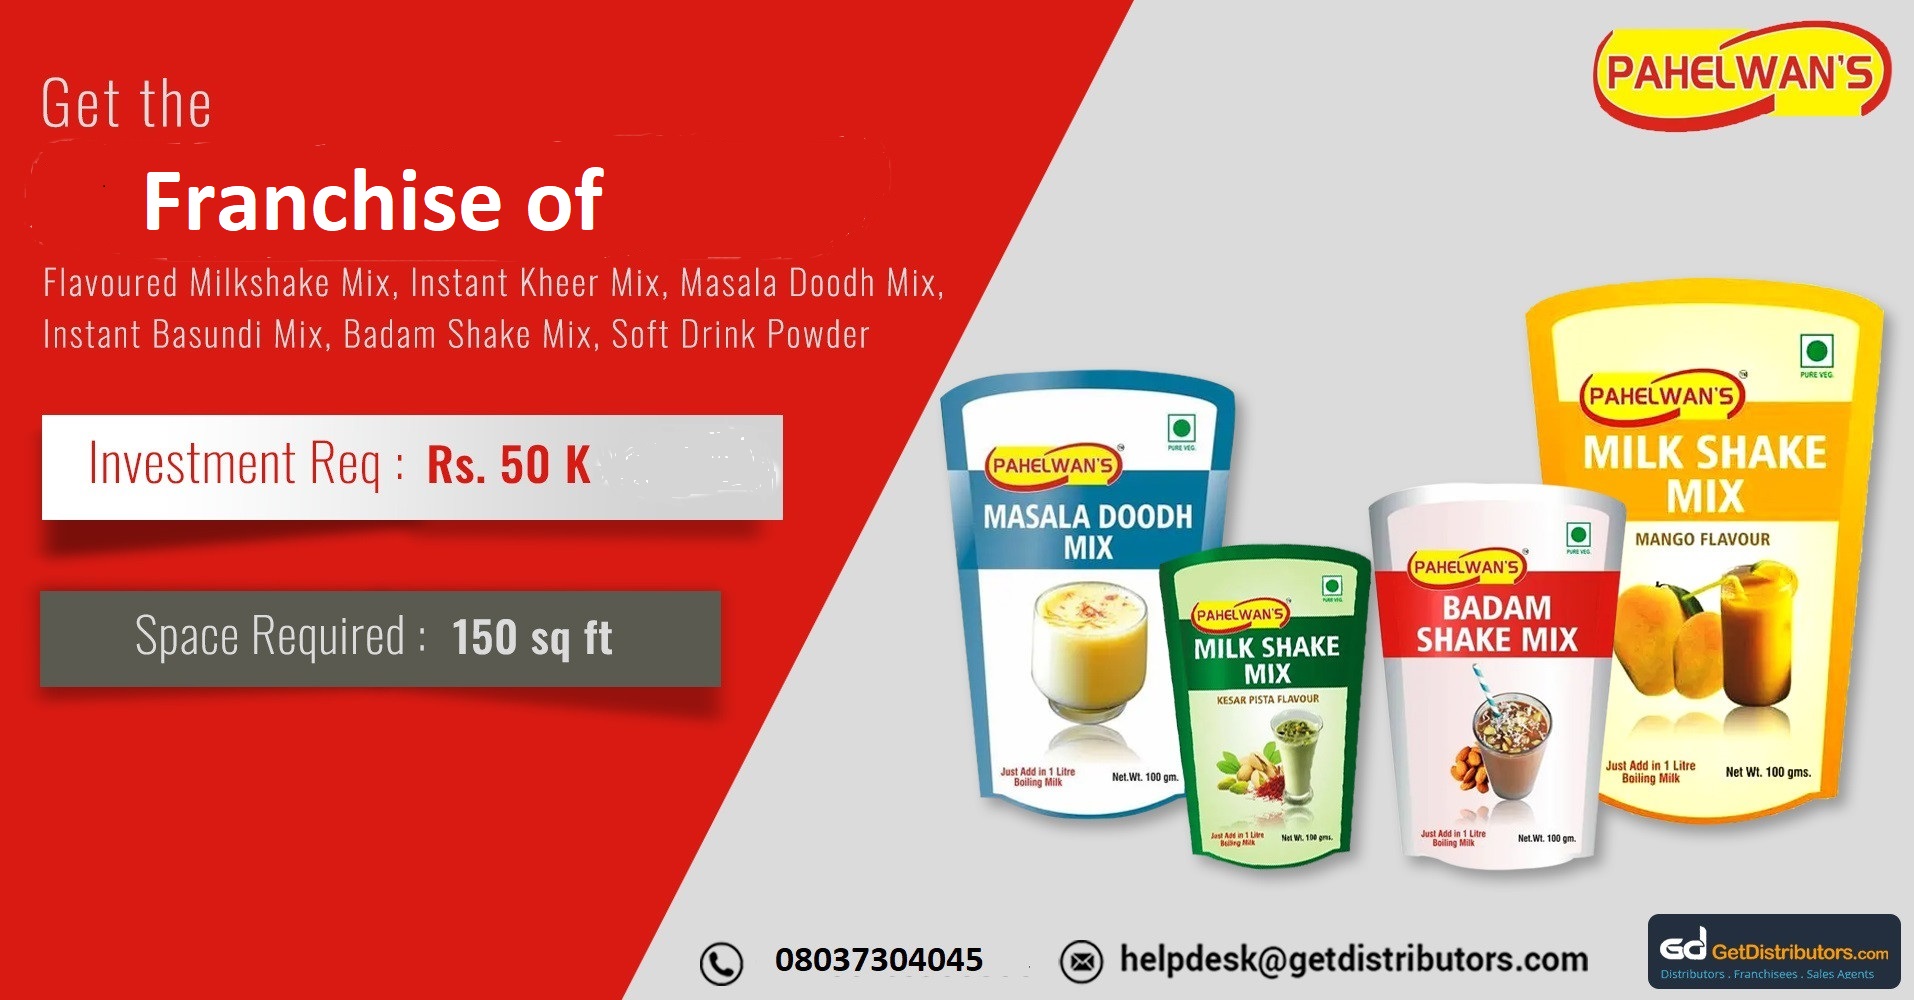 Become the franchisee of milkshakes mixes and instant food items